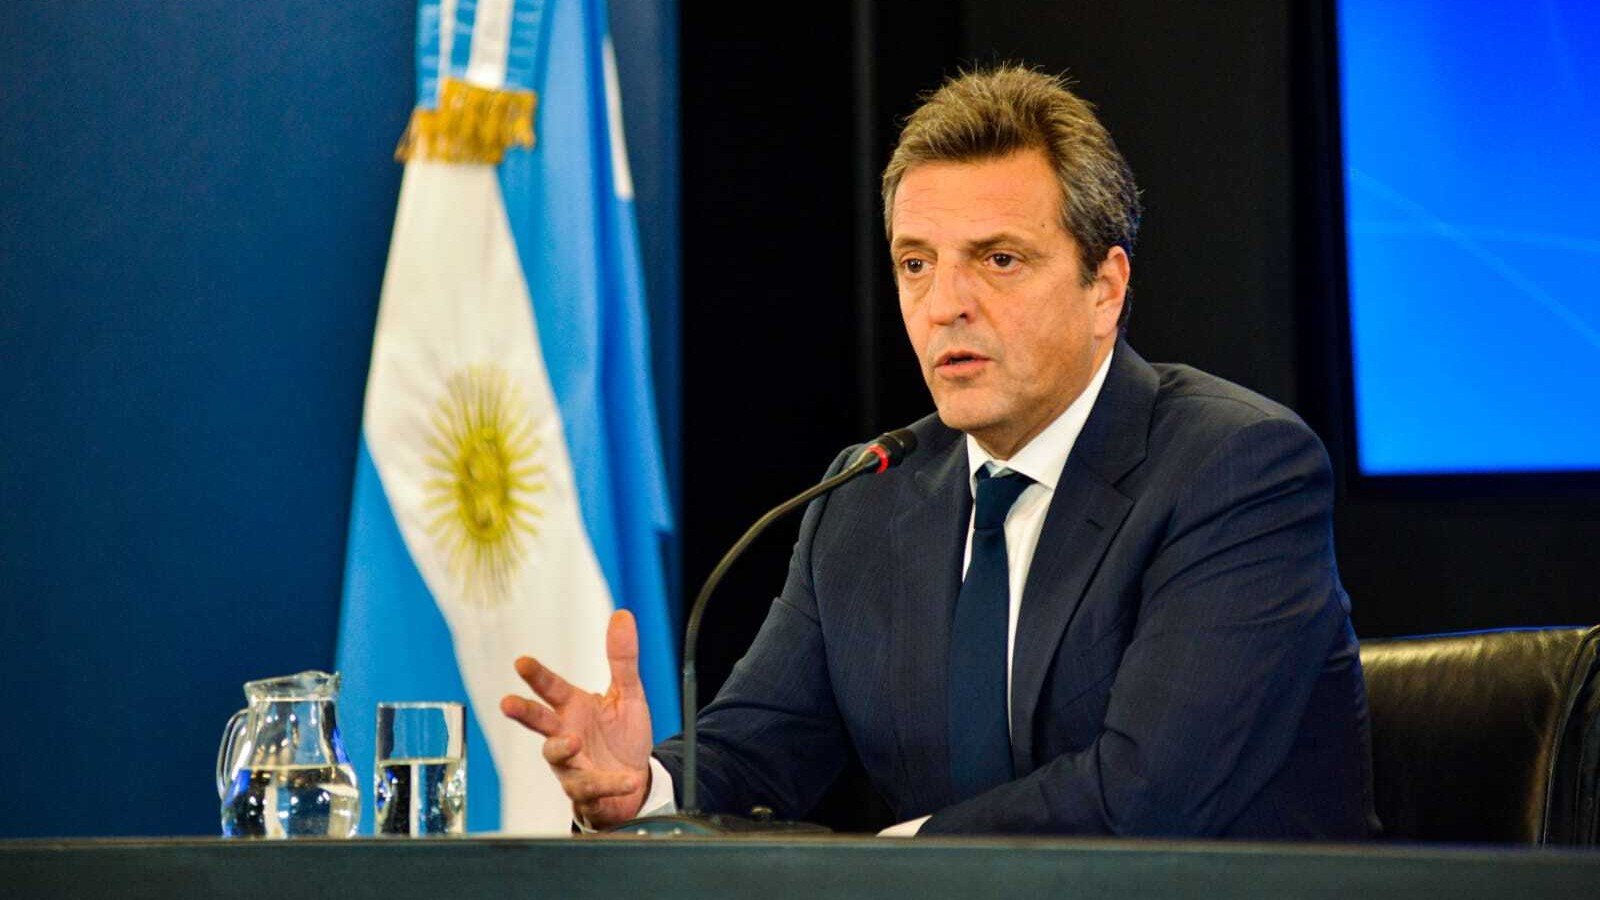 Argentina’s government issues law setting restrictions in new slot machine import regime